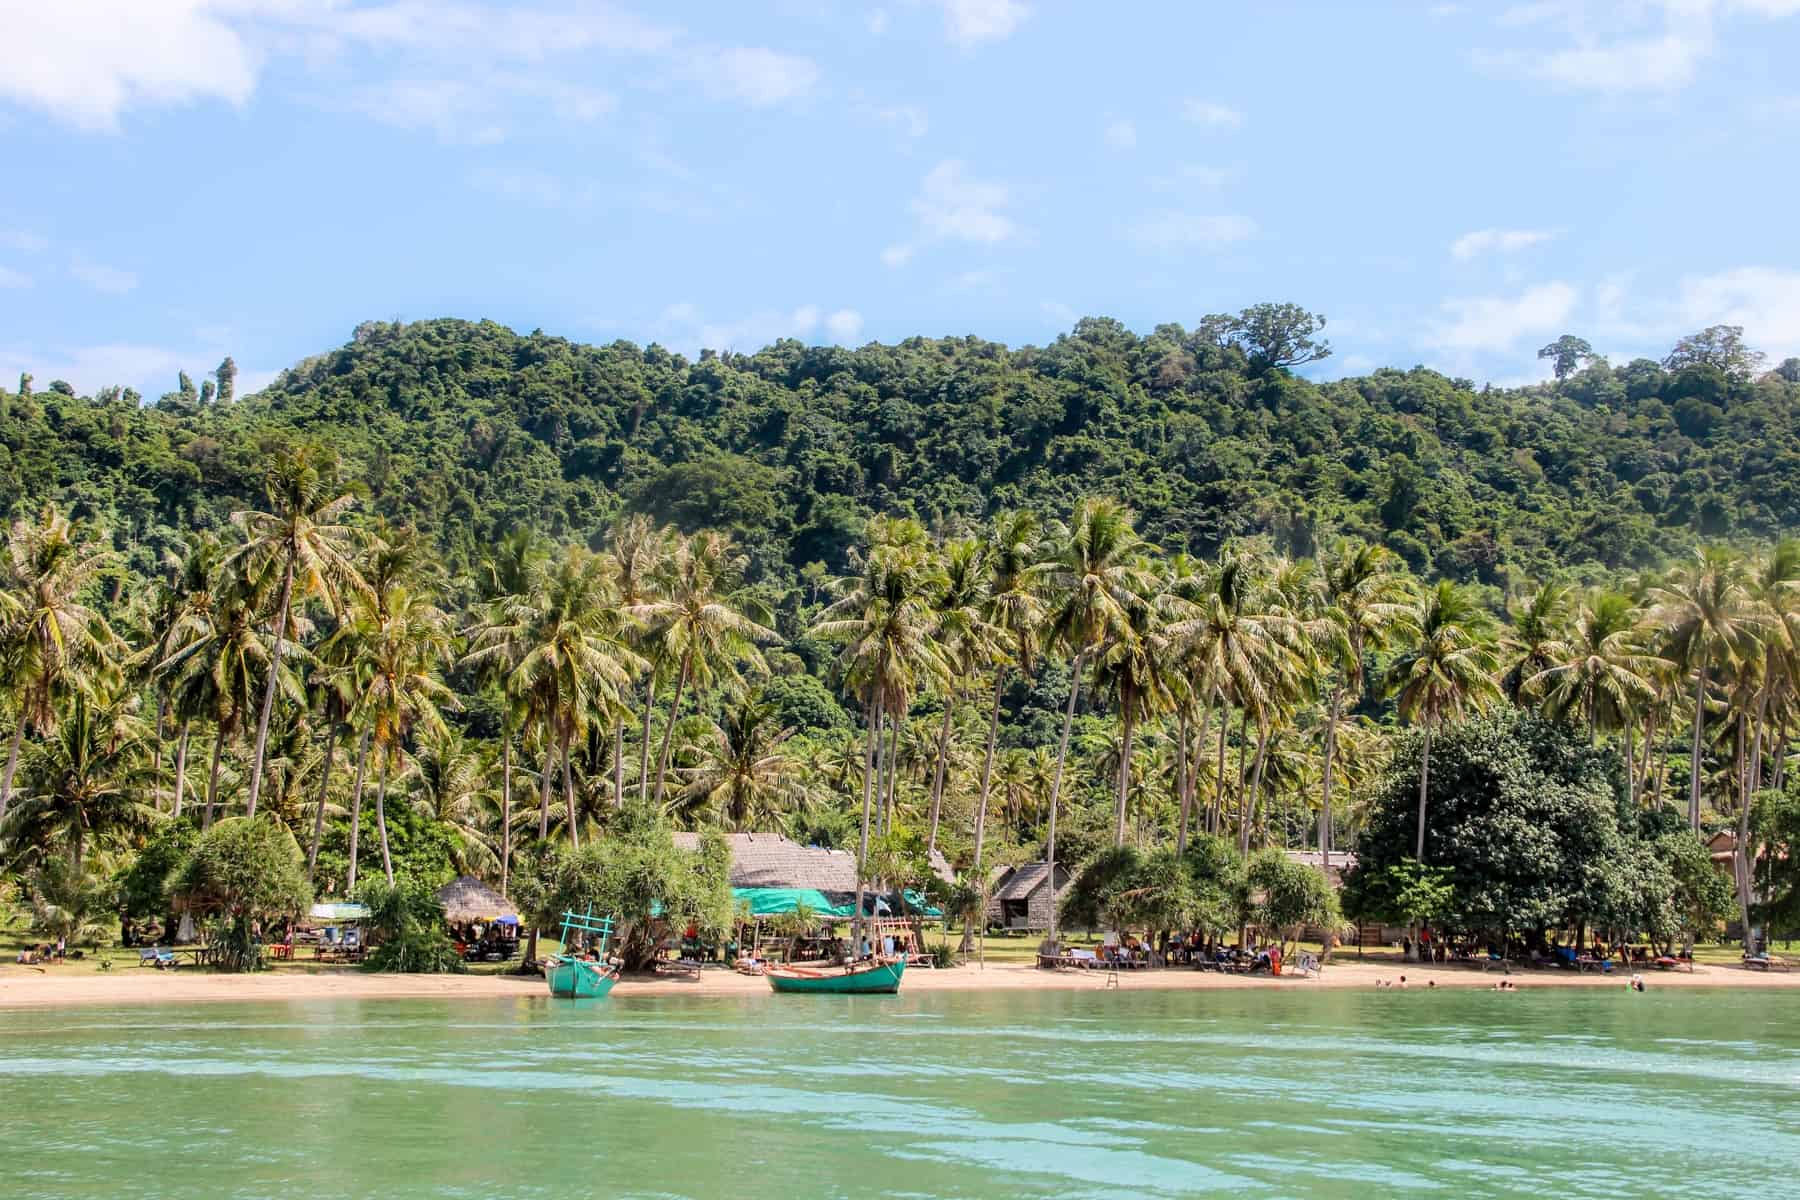 The emerald green waters a nd yellow sand beaches in front of the dense forest filled Rabbit Island in Cambodia